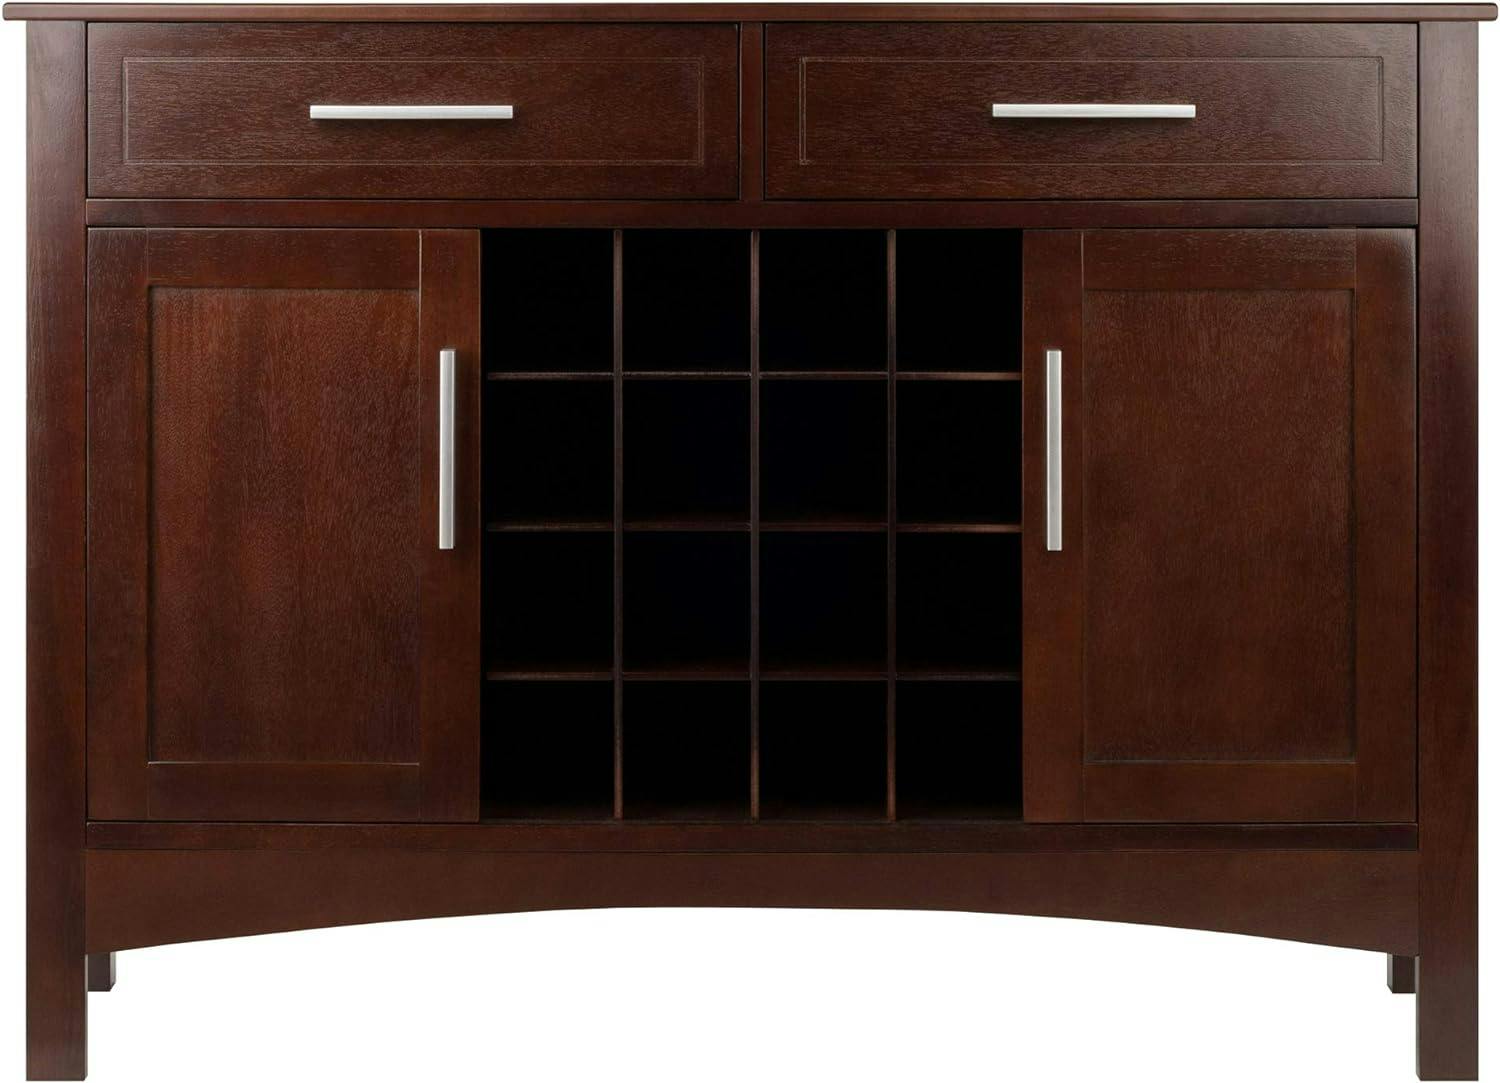 Winsome Transitional Cappuccino Brown Wood Buffet Sideboard